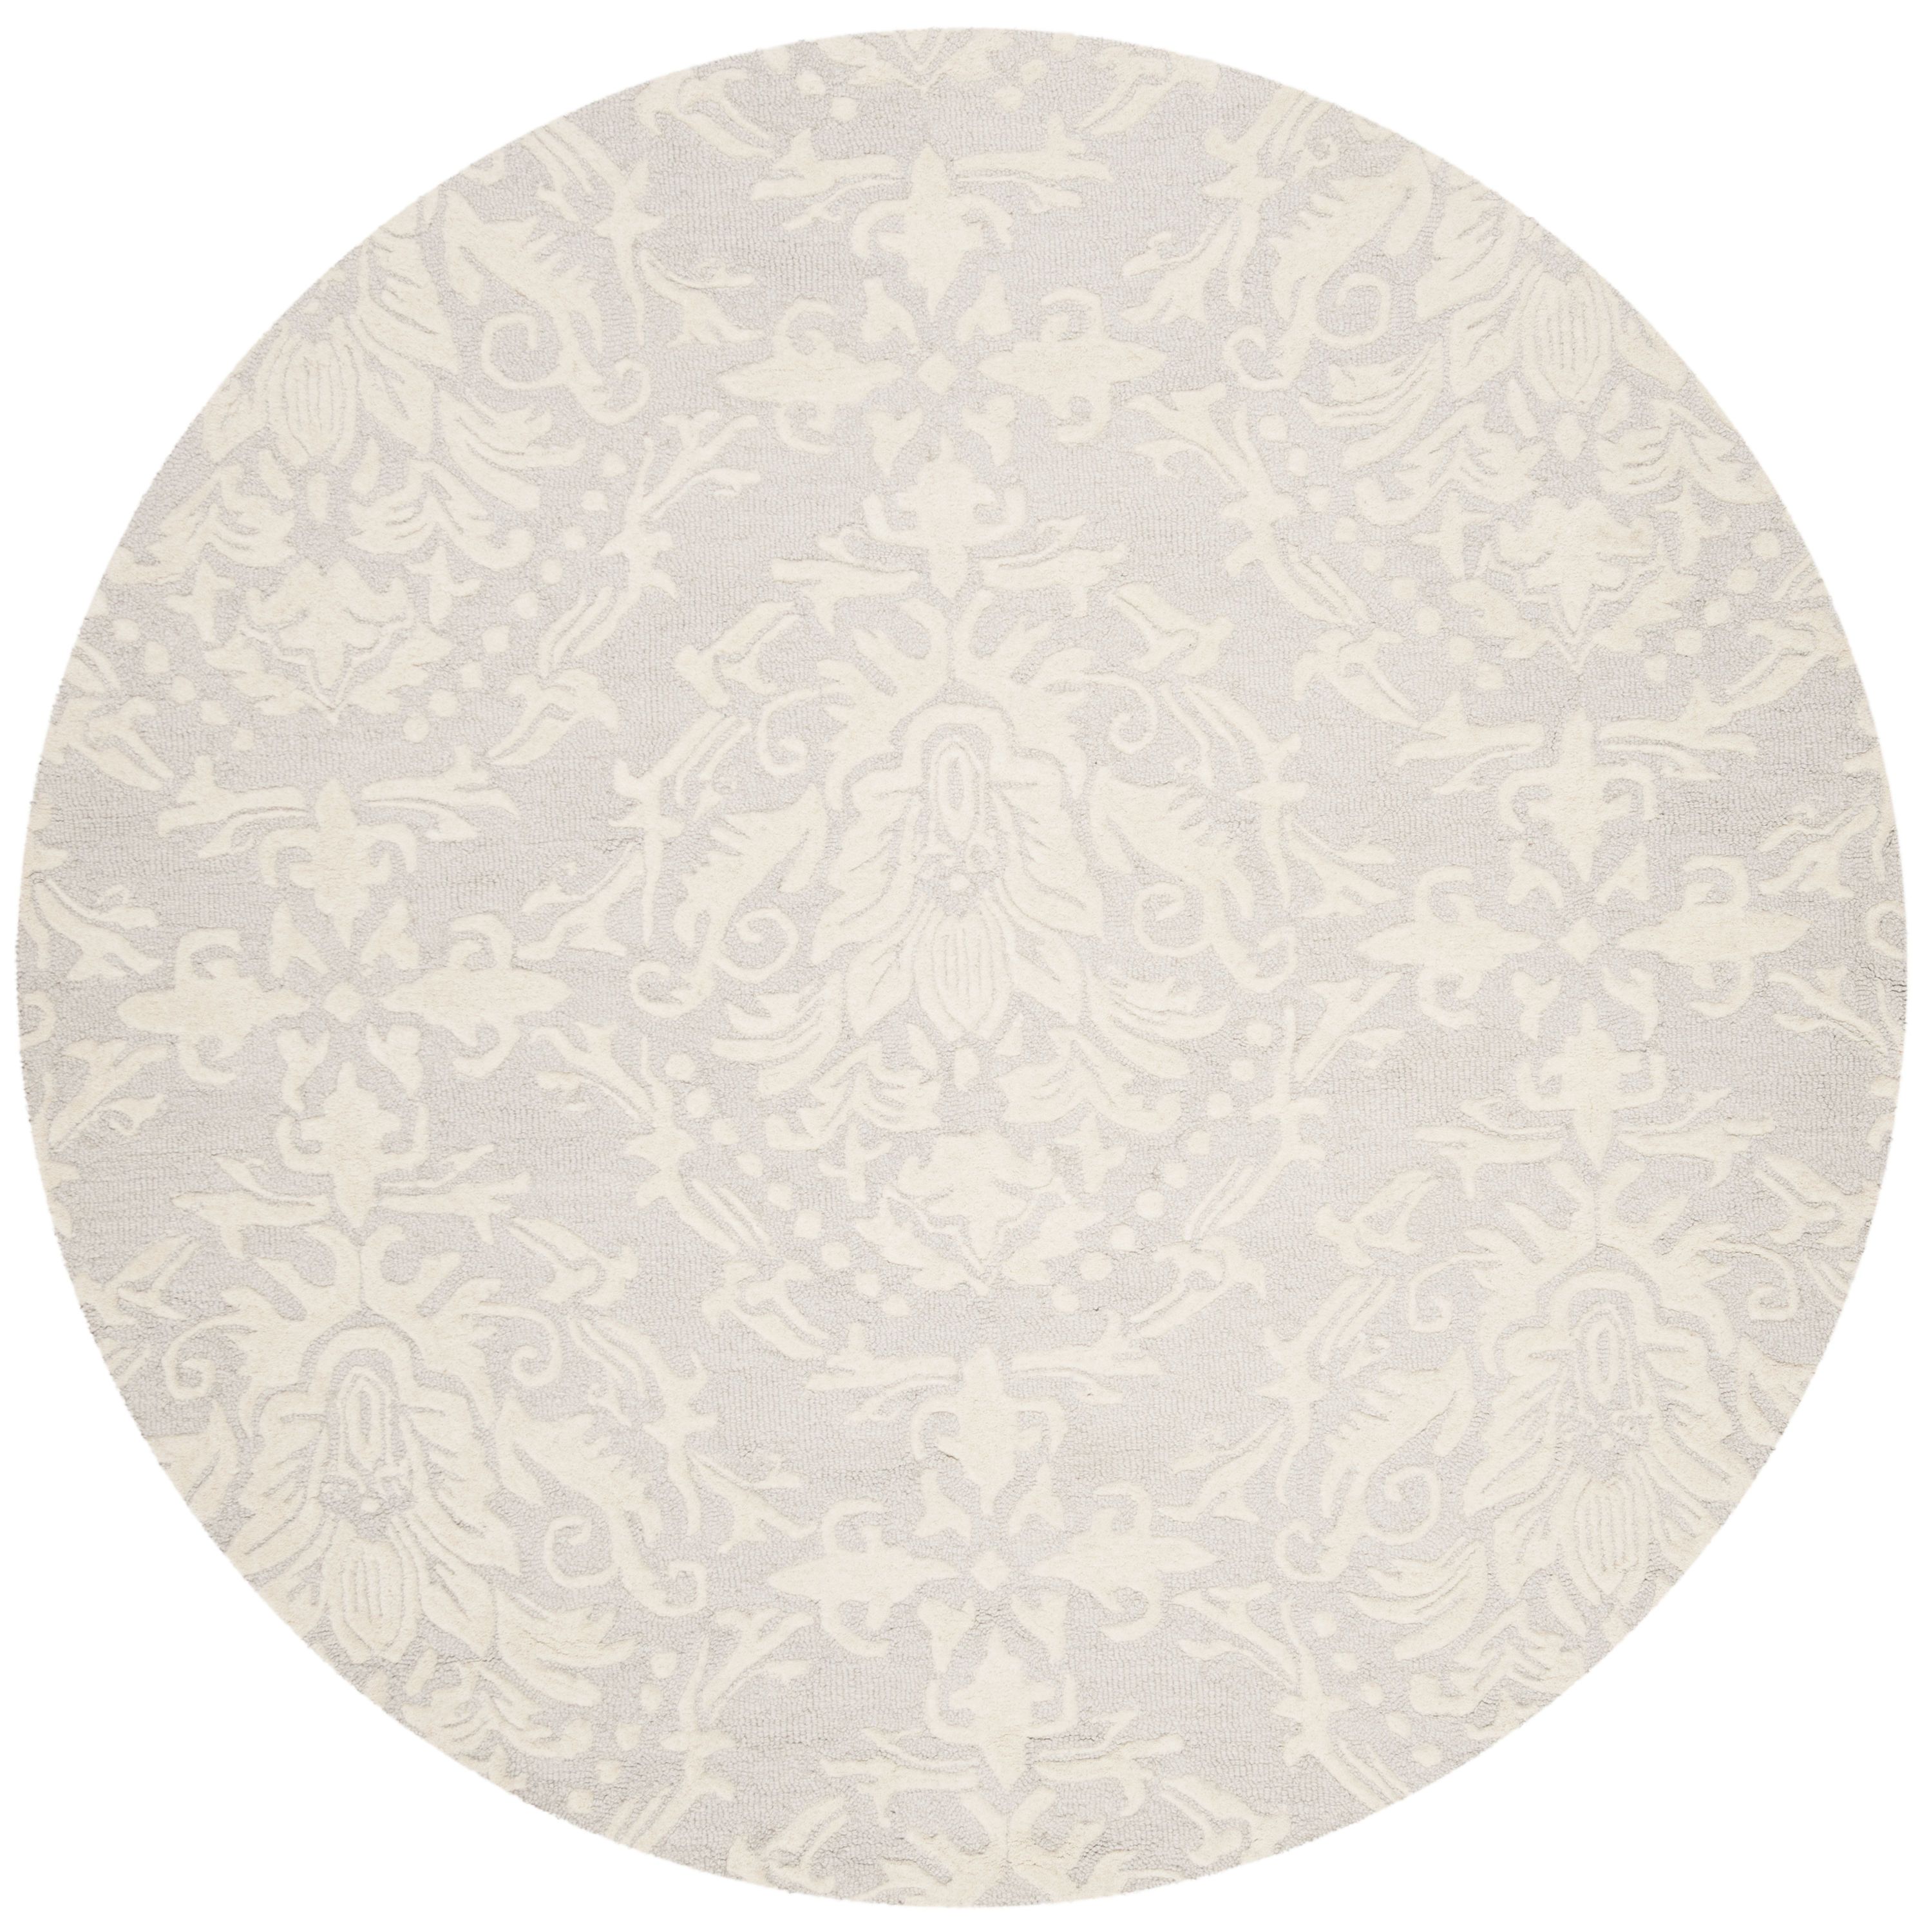 Safavieh Blossom Lollie 6 X 6 Wool Light Gray/ivory Round Indoor  Floral/botanical Bohemian/eclectic Area Rug In The Rugs Department At  Lowes Regarding Ivory Blossom Round Rugs (Photo 12 of 15)